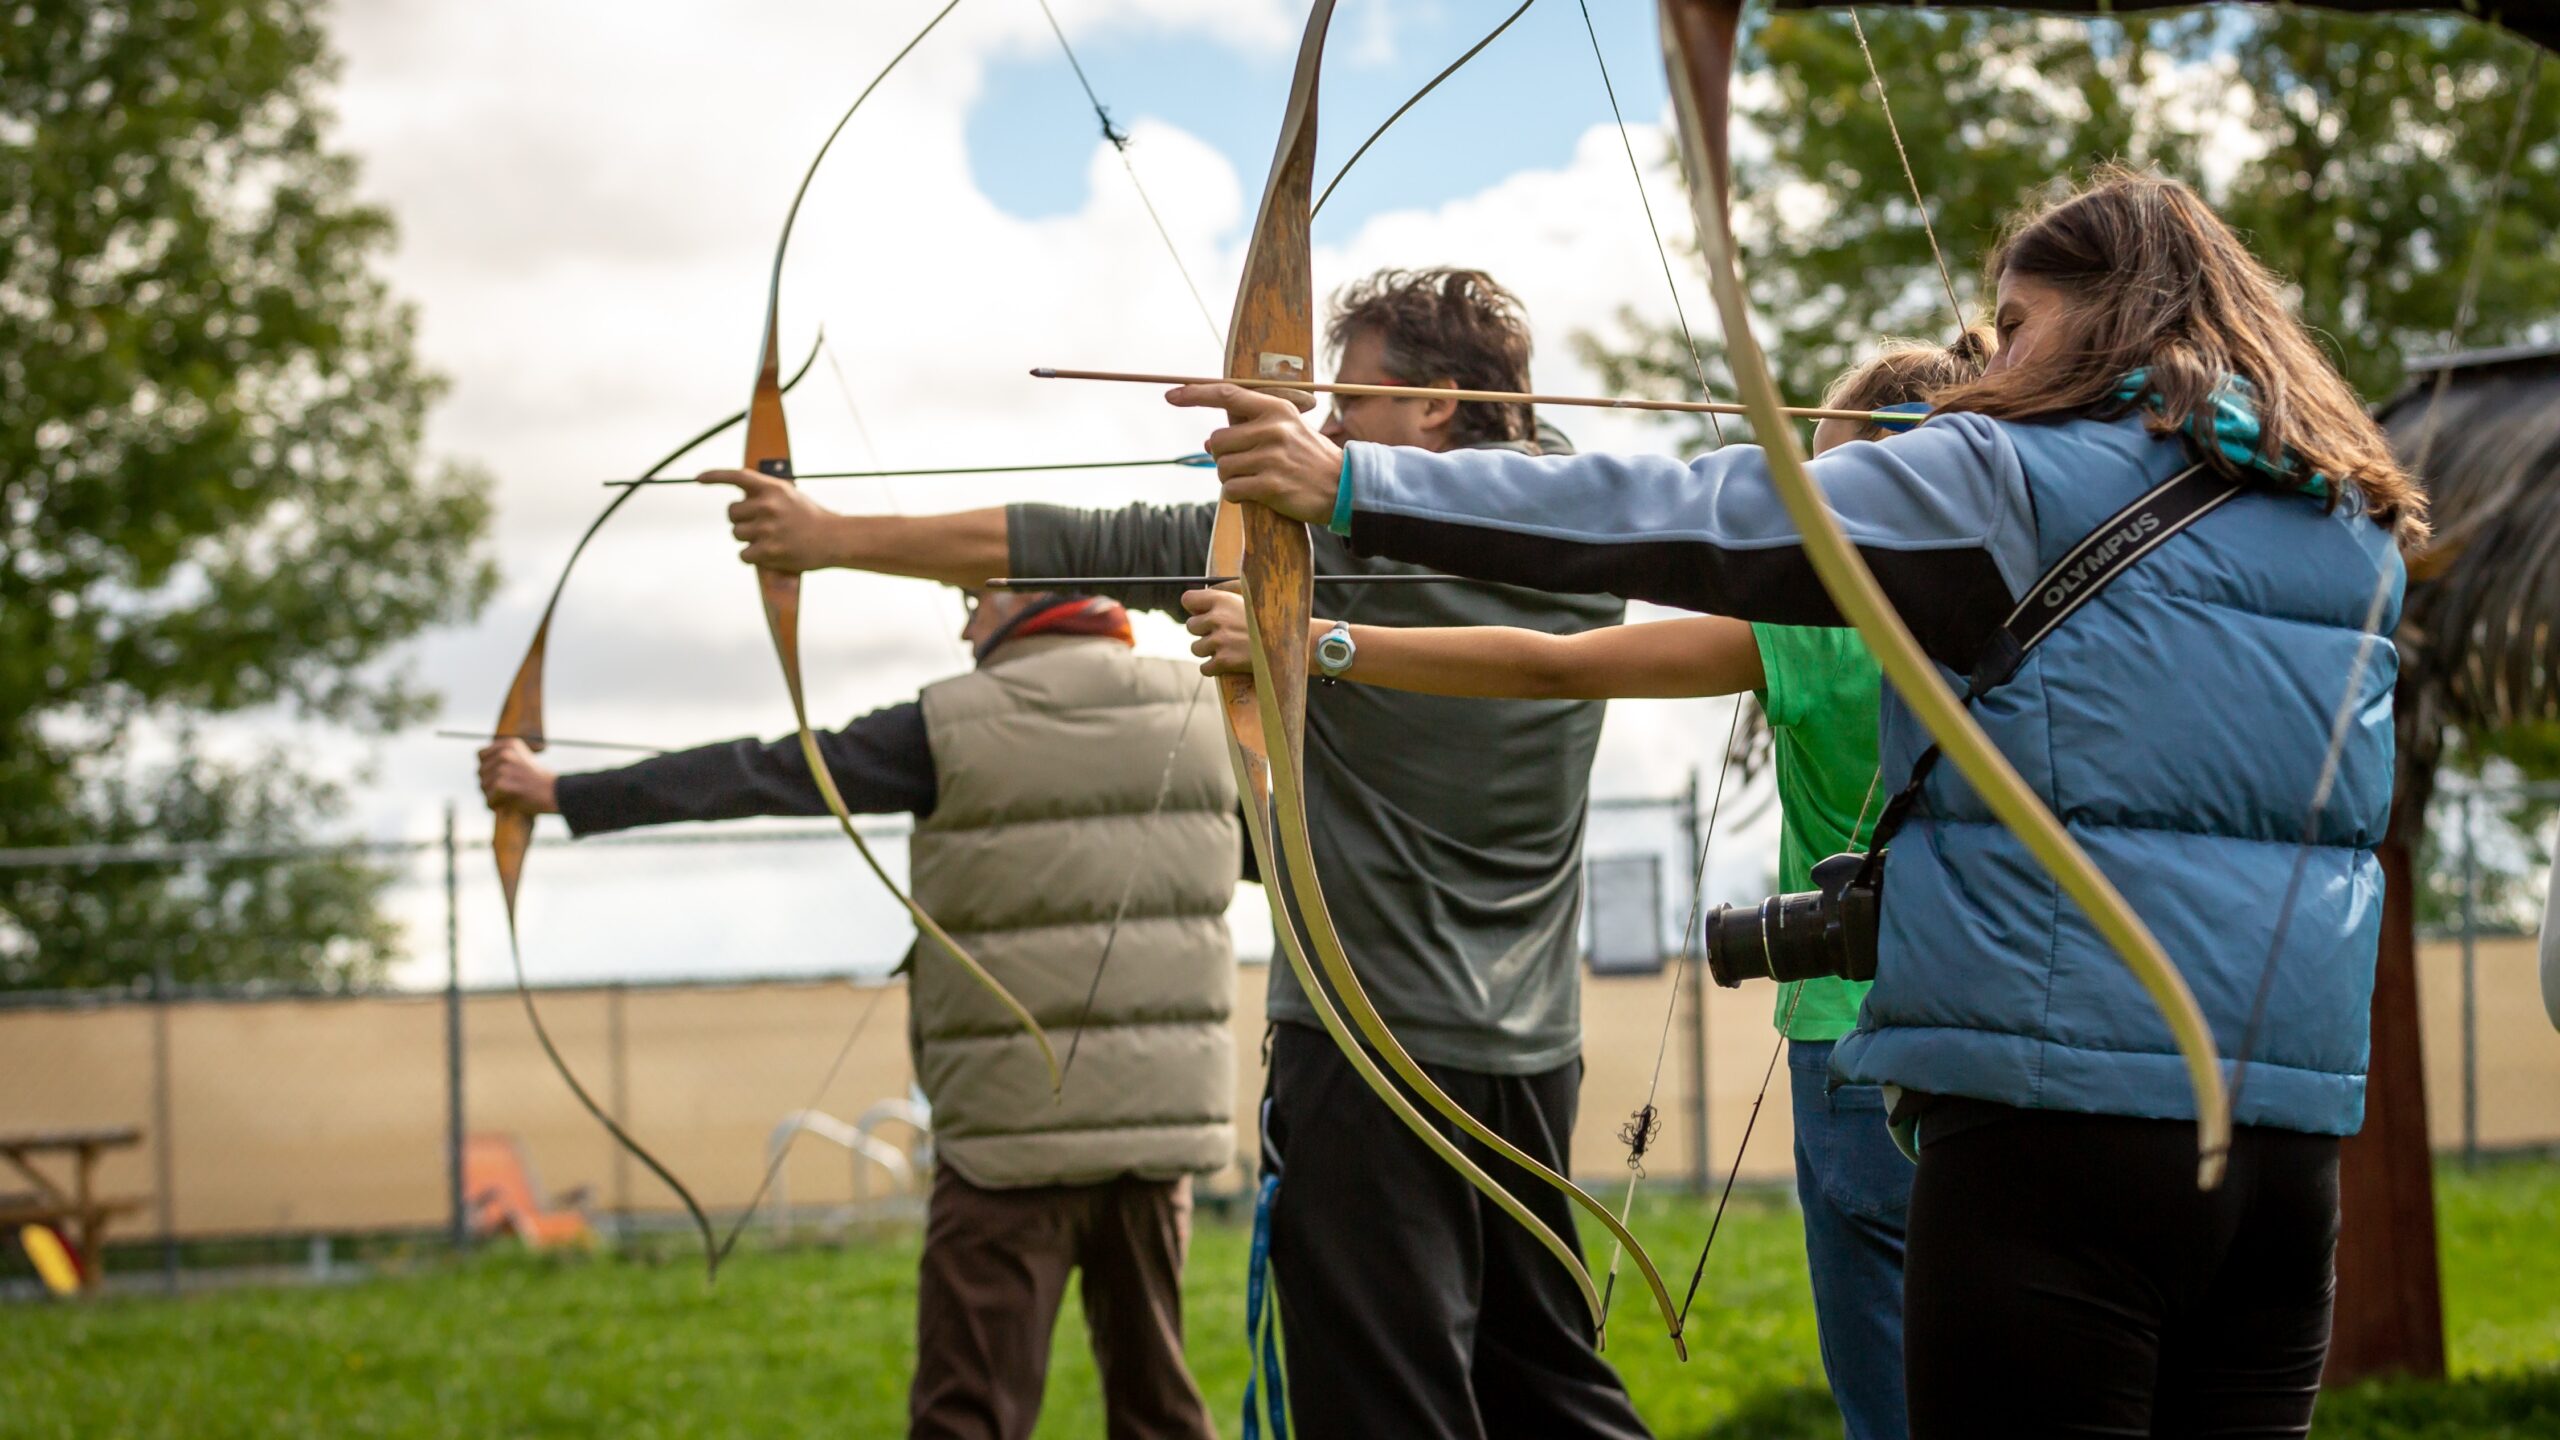 Archery – A Sustainable Skill